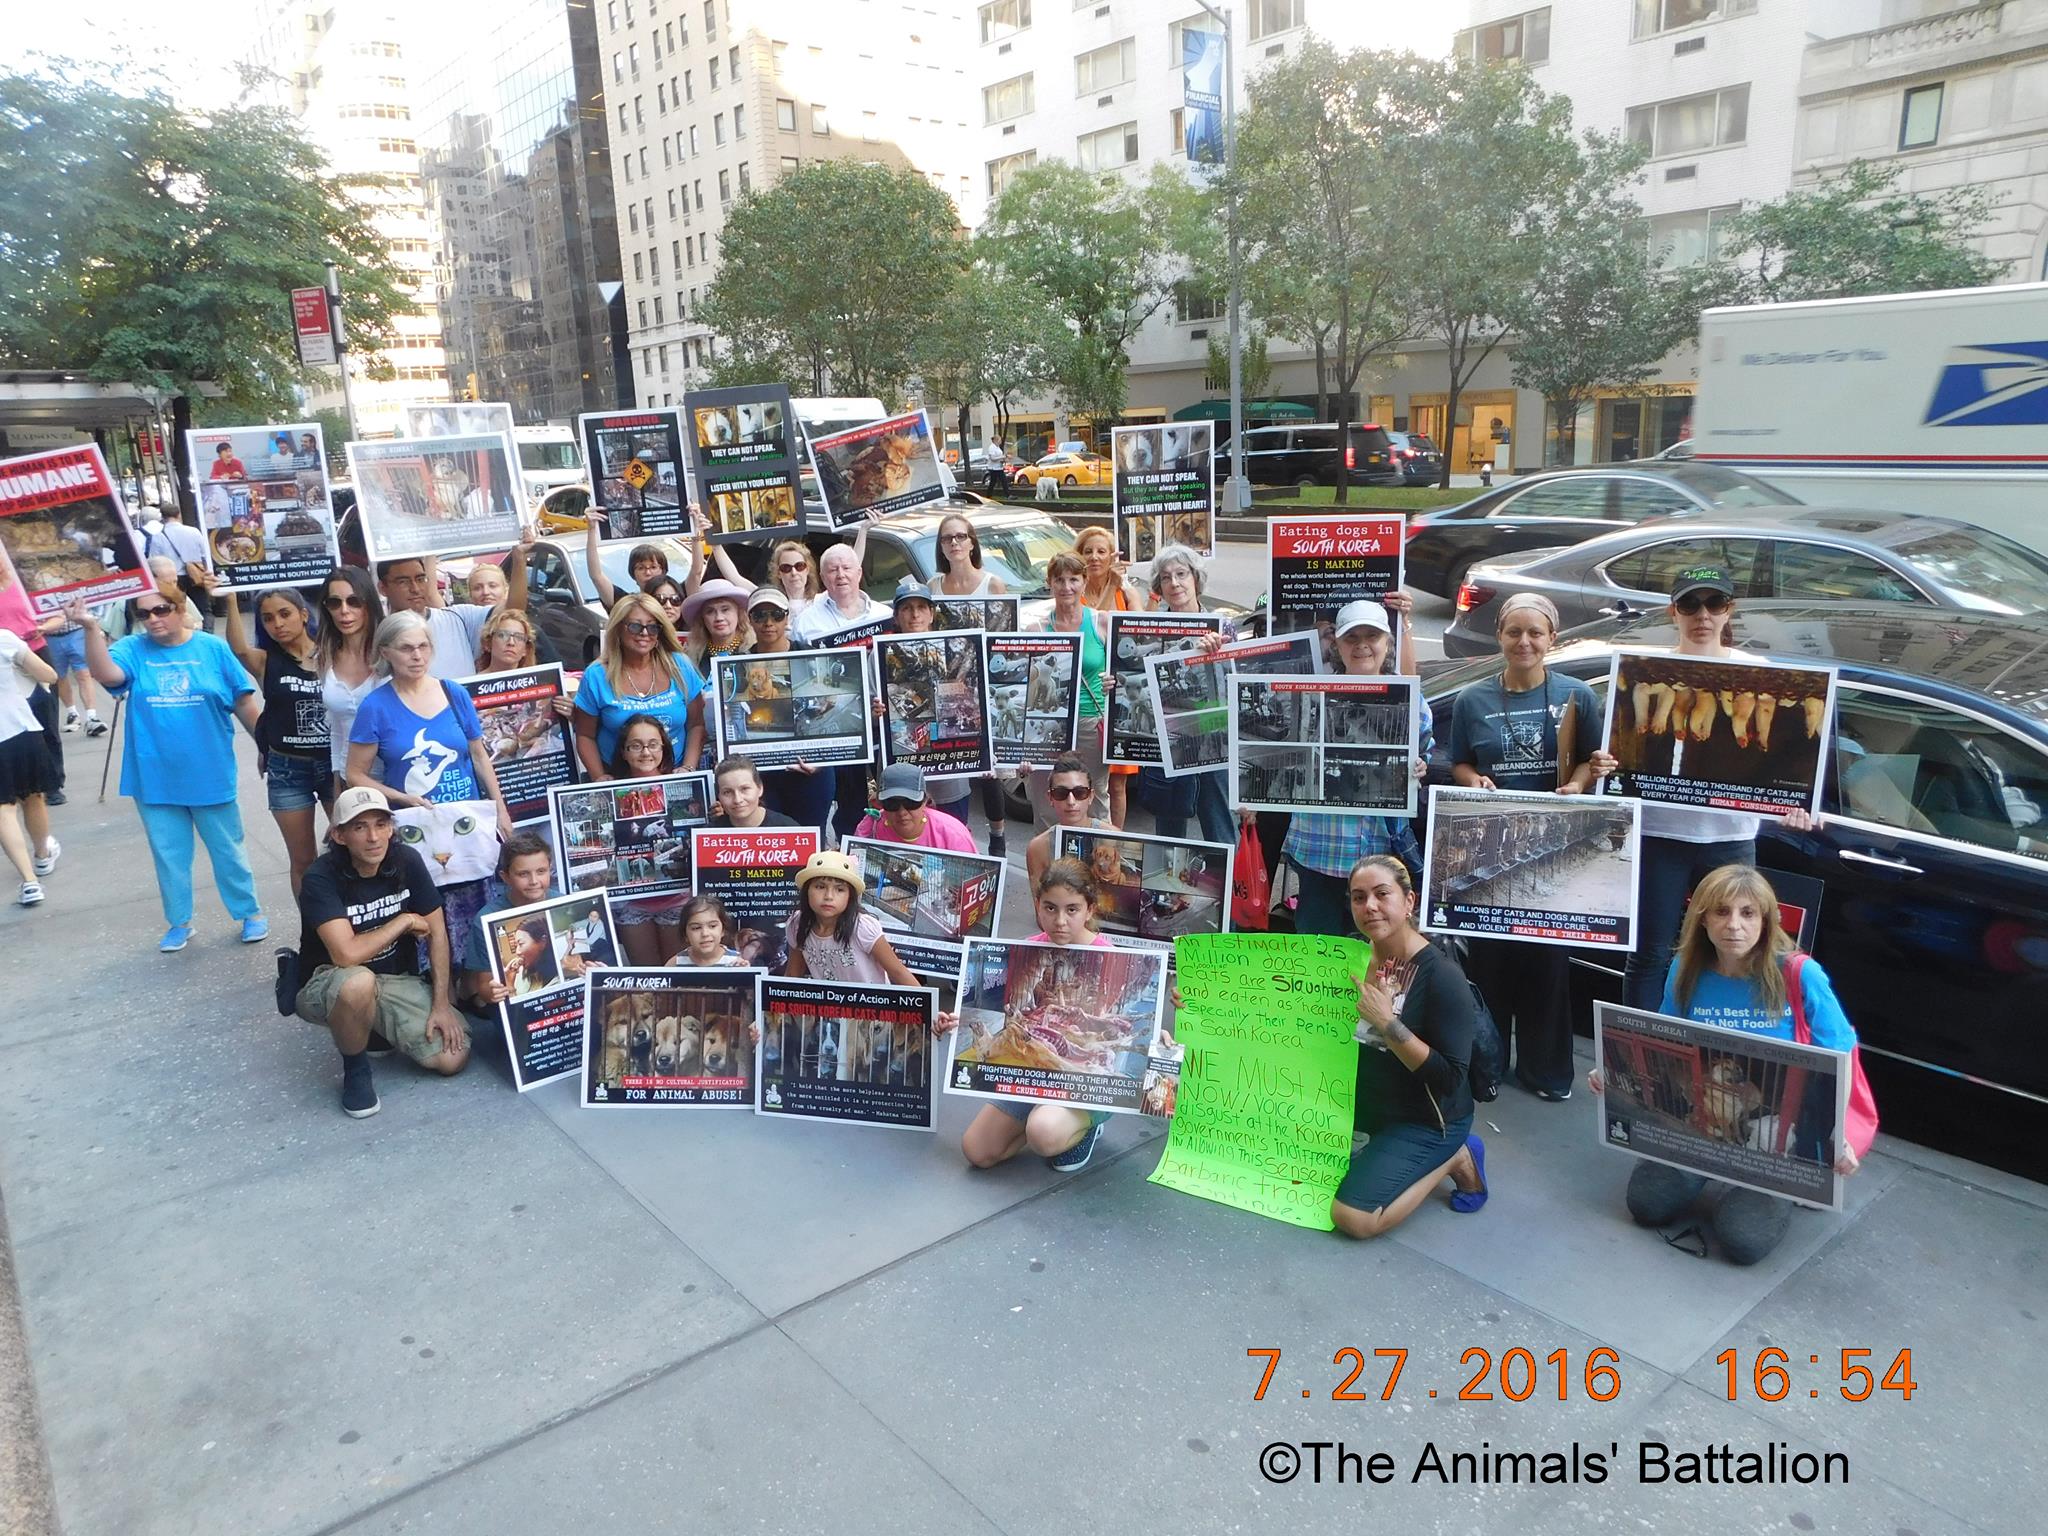 New York, South Korean Consulate General, International Day of Action for South Korean Dogs and Cats (Day 2) – July 27, 2016 Organized by The Animals’ Battalion